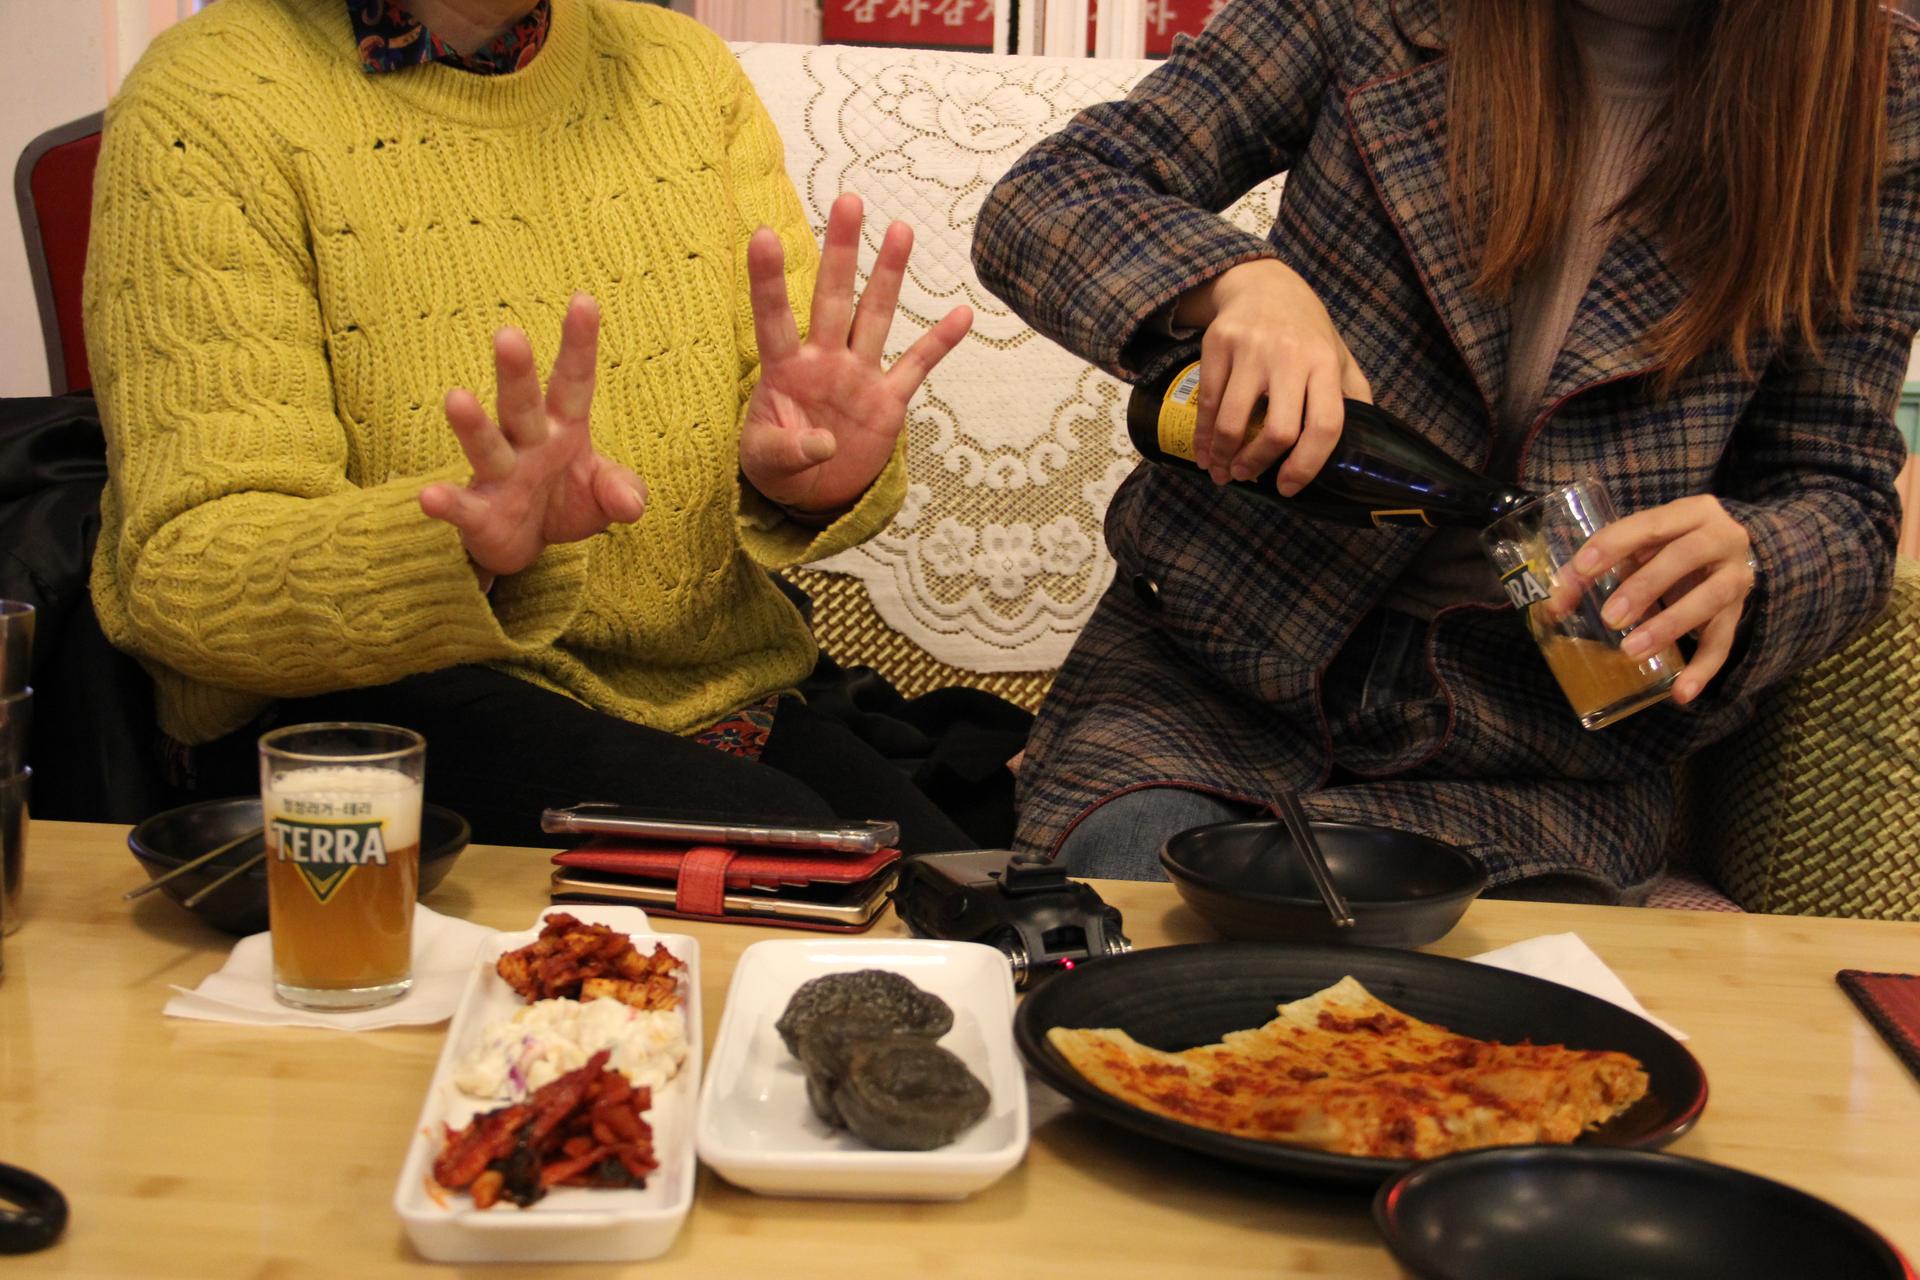 Kim Eun-joo (right) does Han (left) the courtesy of pouring a glass of beer before they begin eating dinner.